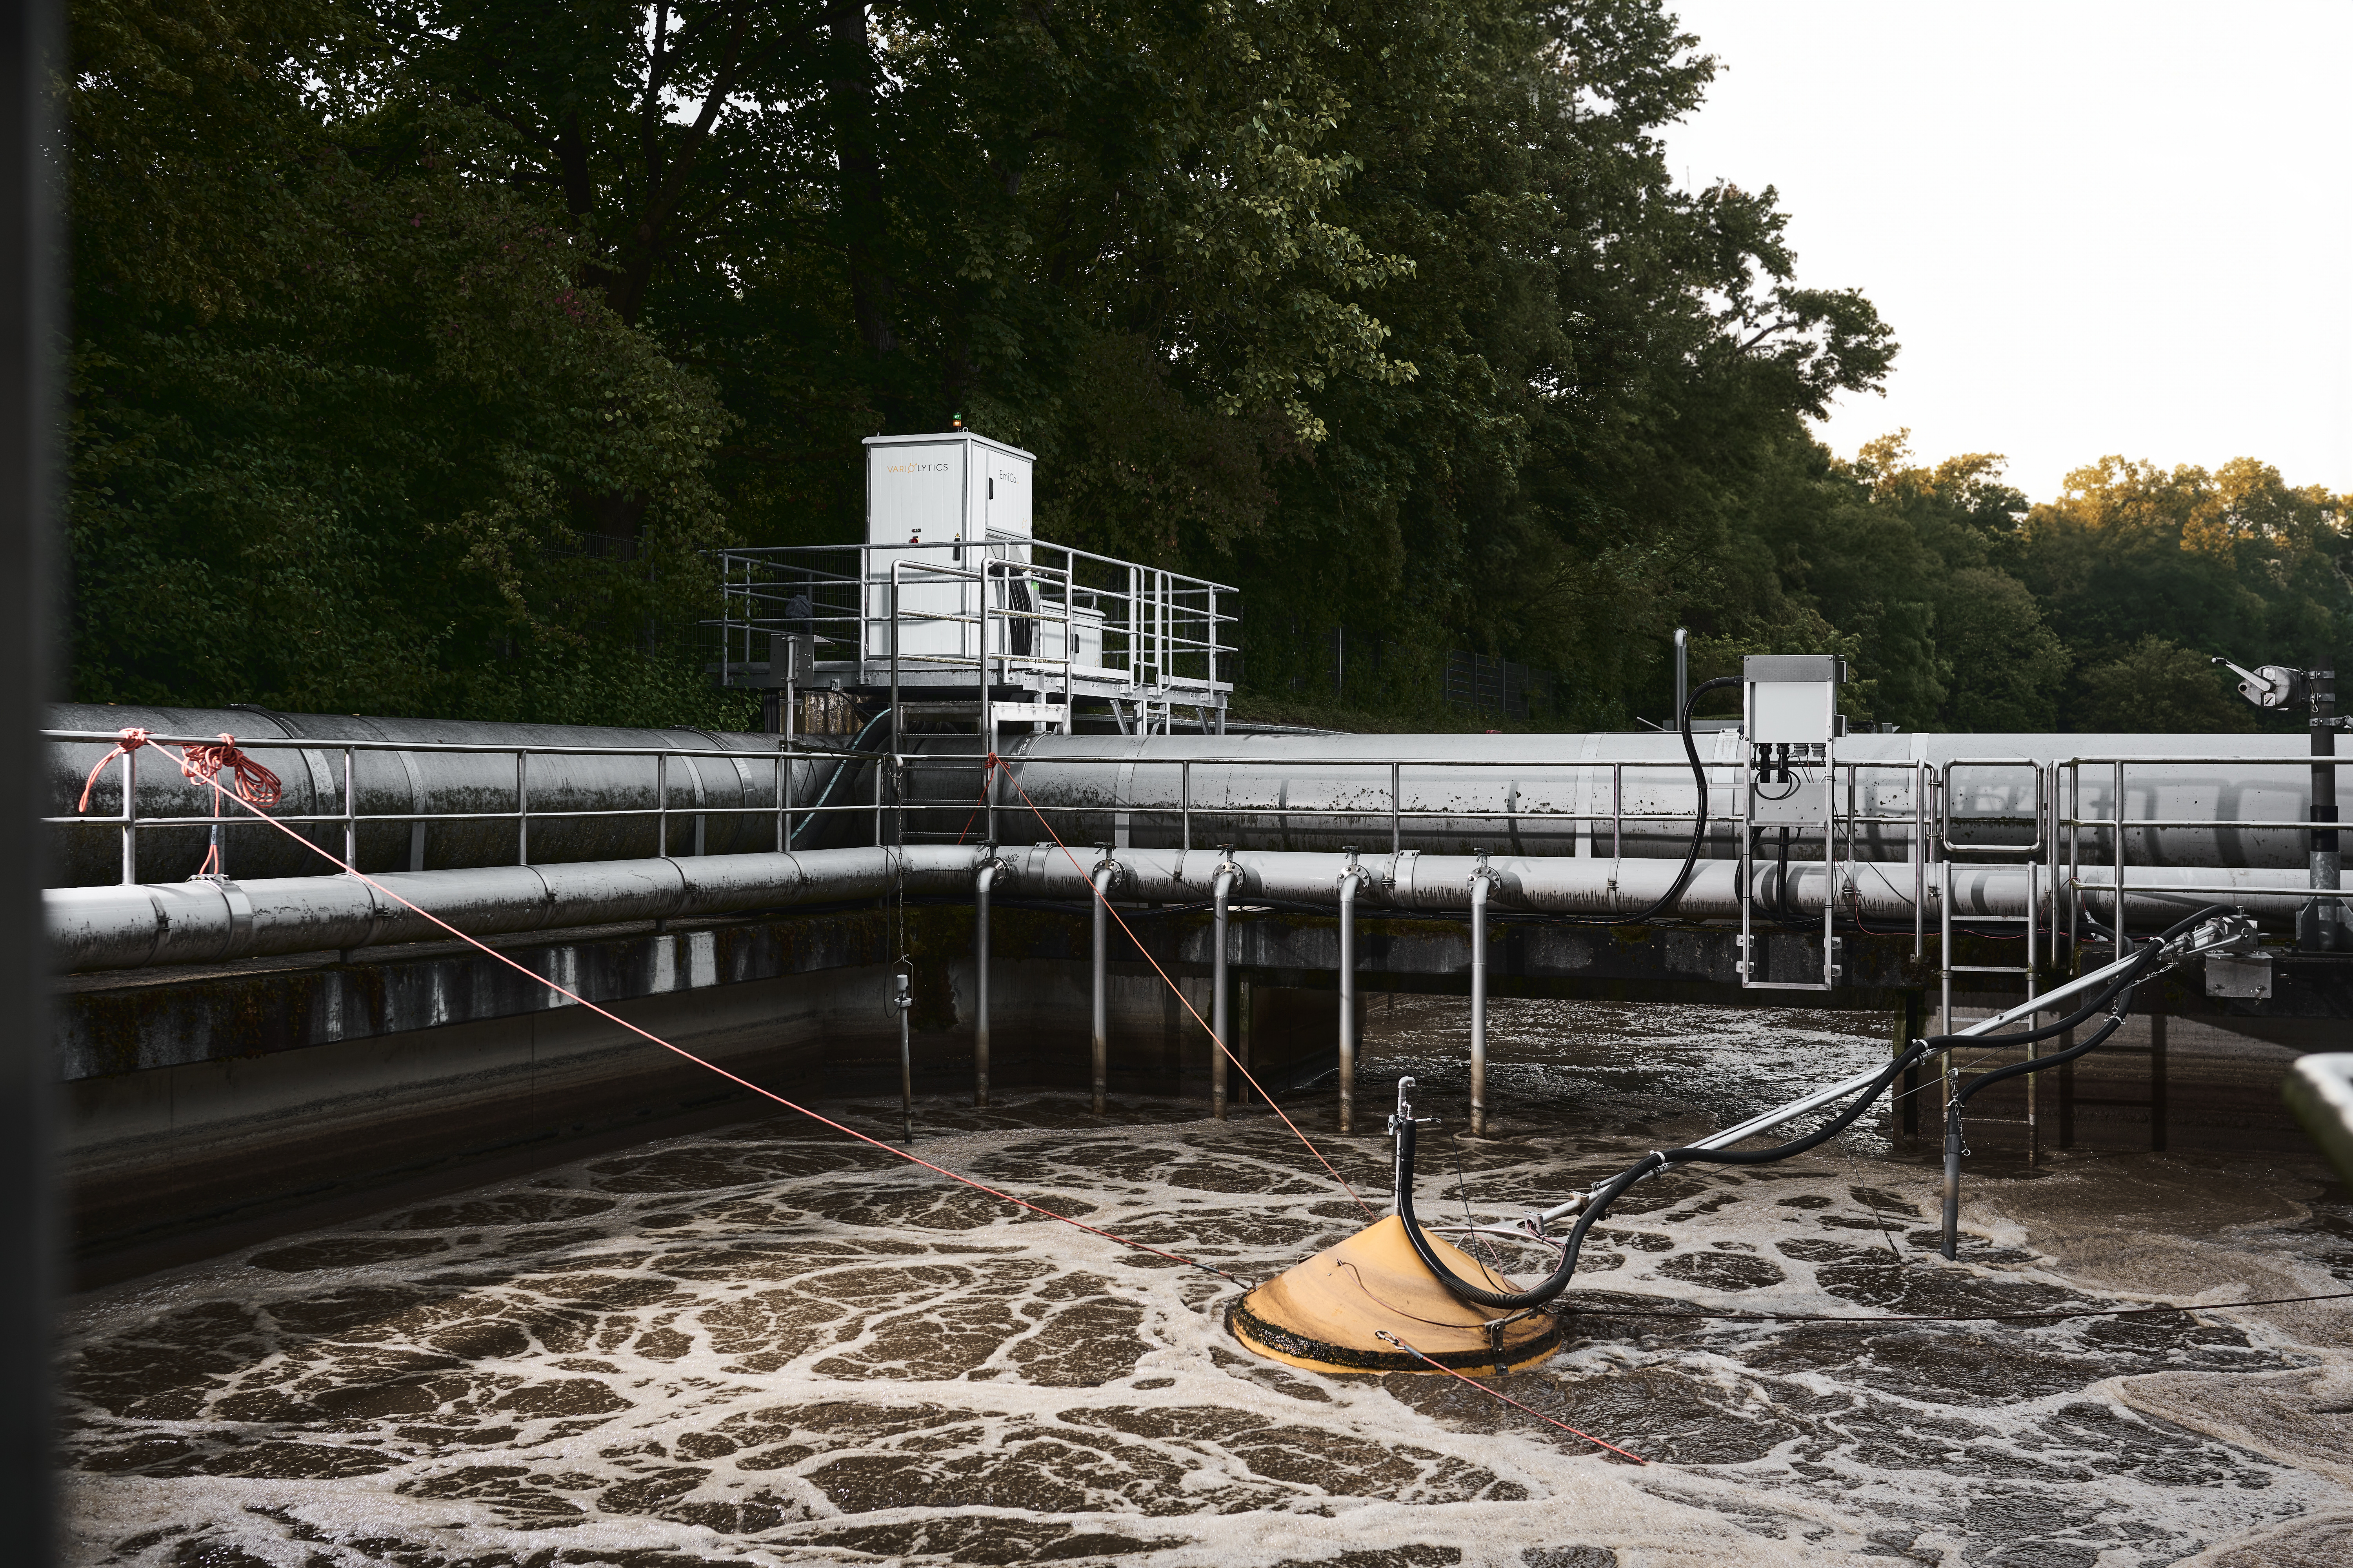 Wastewater treatment plant with a tank of moving wastewater in which an orange hood floats and is connected to an analyser outside the tank.